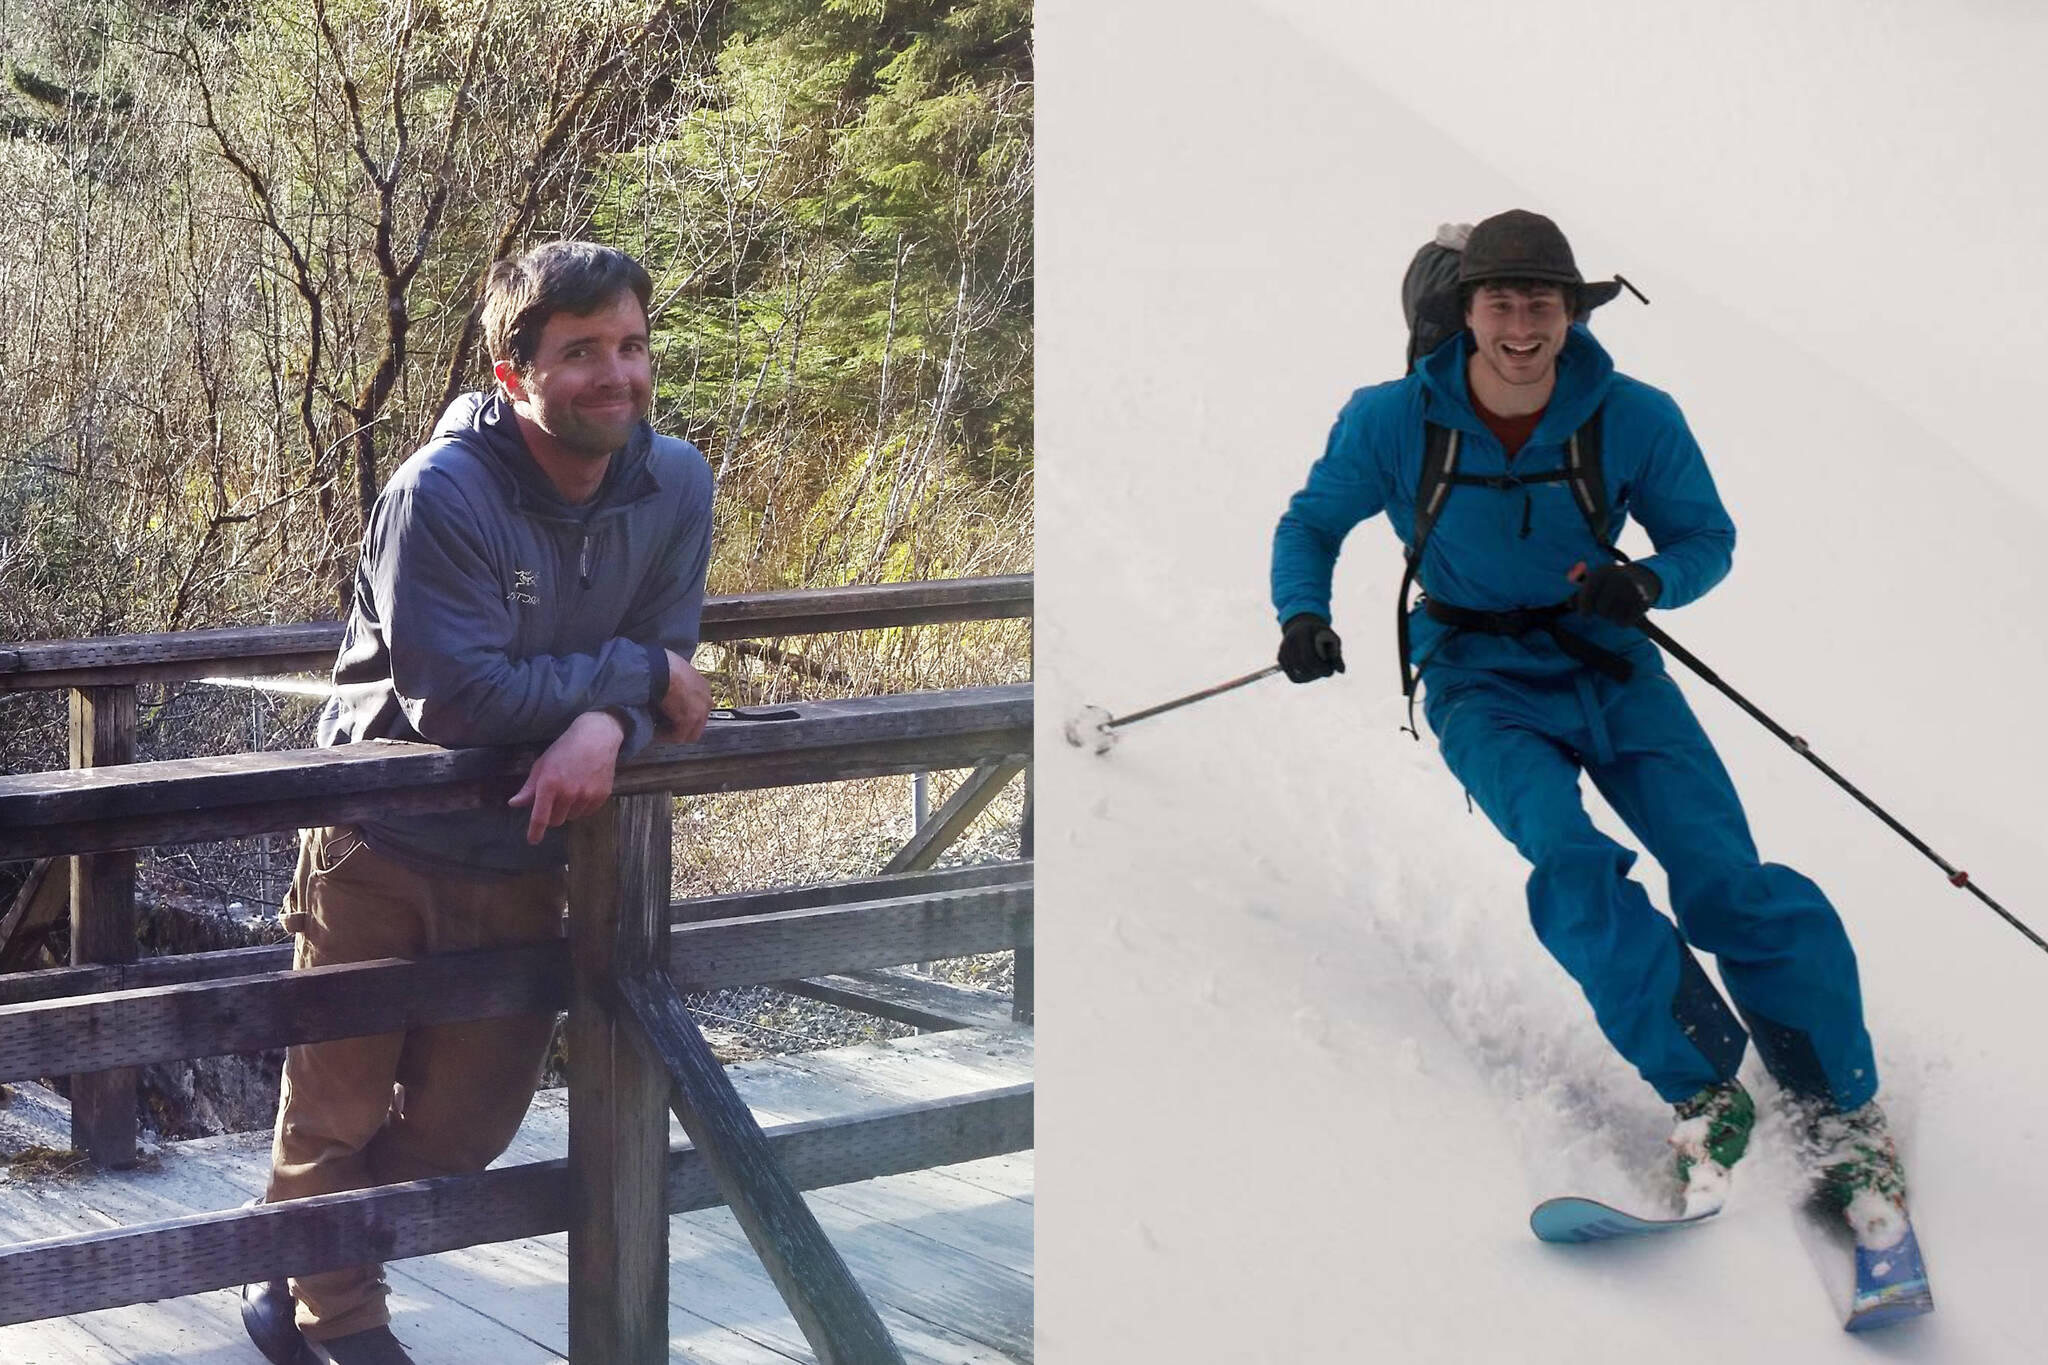 Courtesy Photos / Ruth Johnson, Serge Leclerc
This week marks five years since climber’s Ryan Johnson, left, and Marc-Andre Leclerc, right, were reported missing after summiting the north face of the Mendenhall Towers in Juneau.